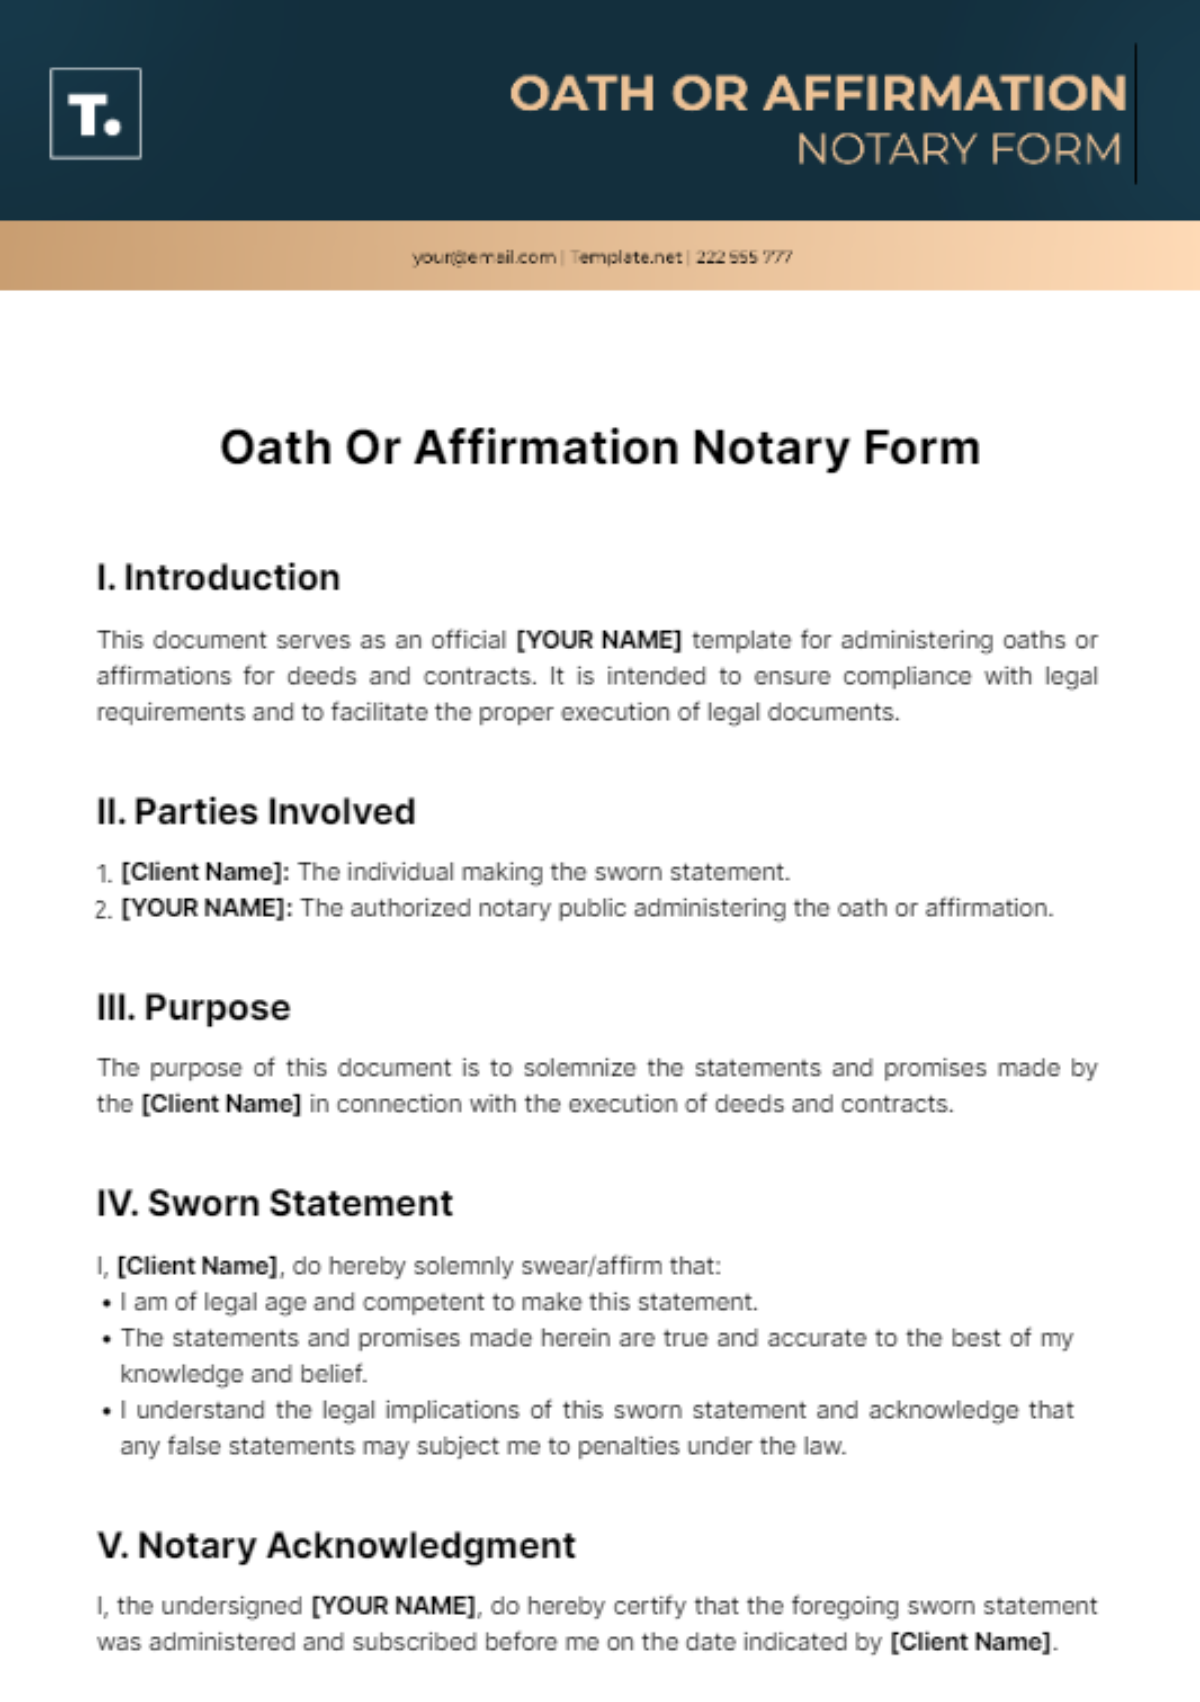 Free Oath Or Affirmation Notary Form Template